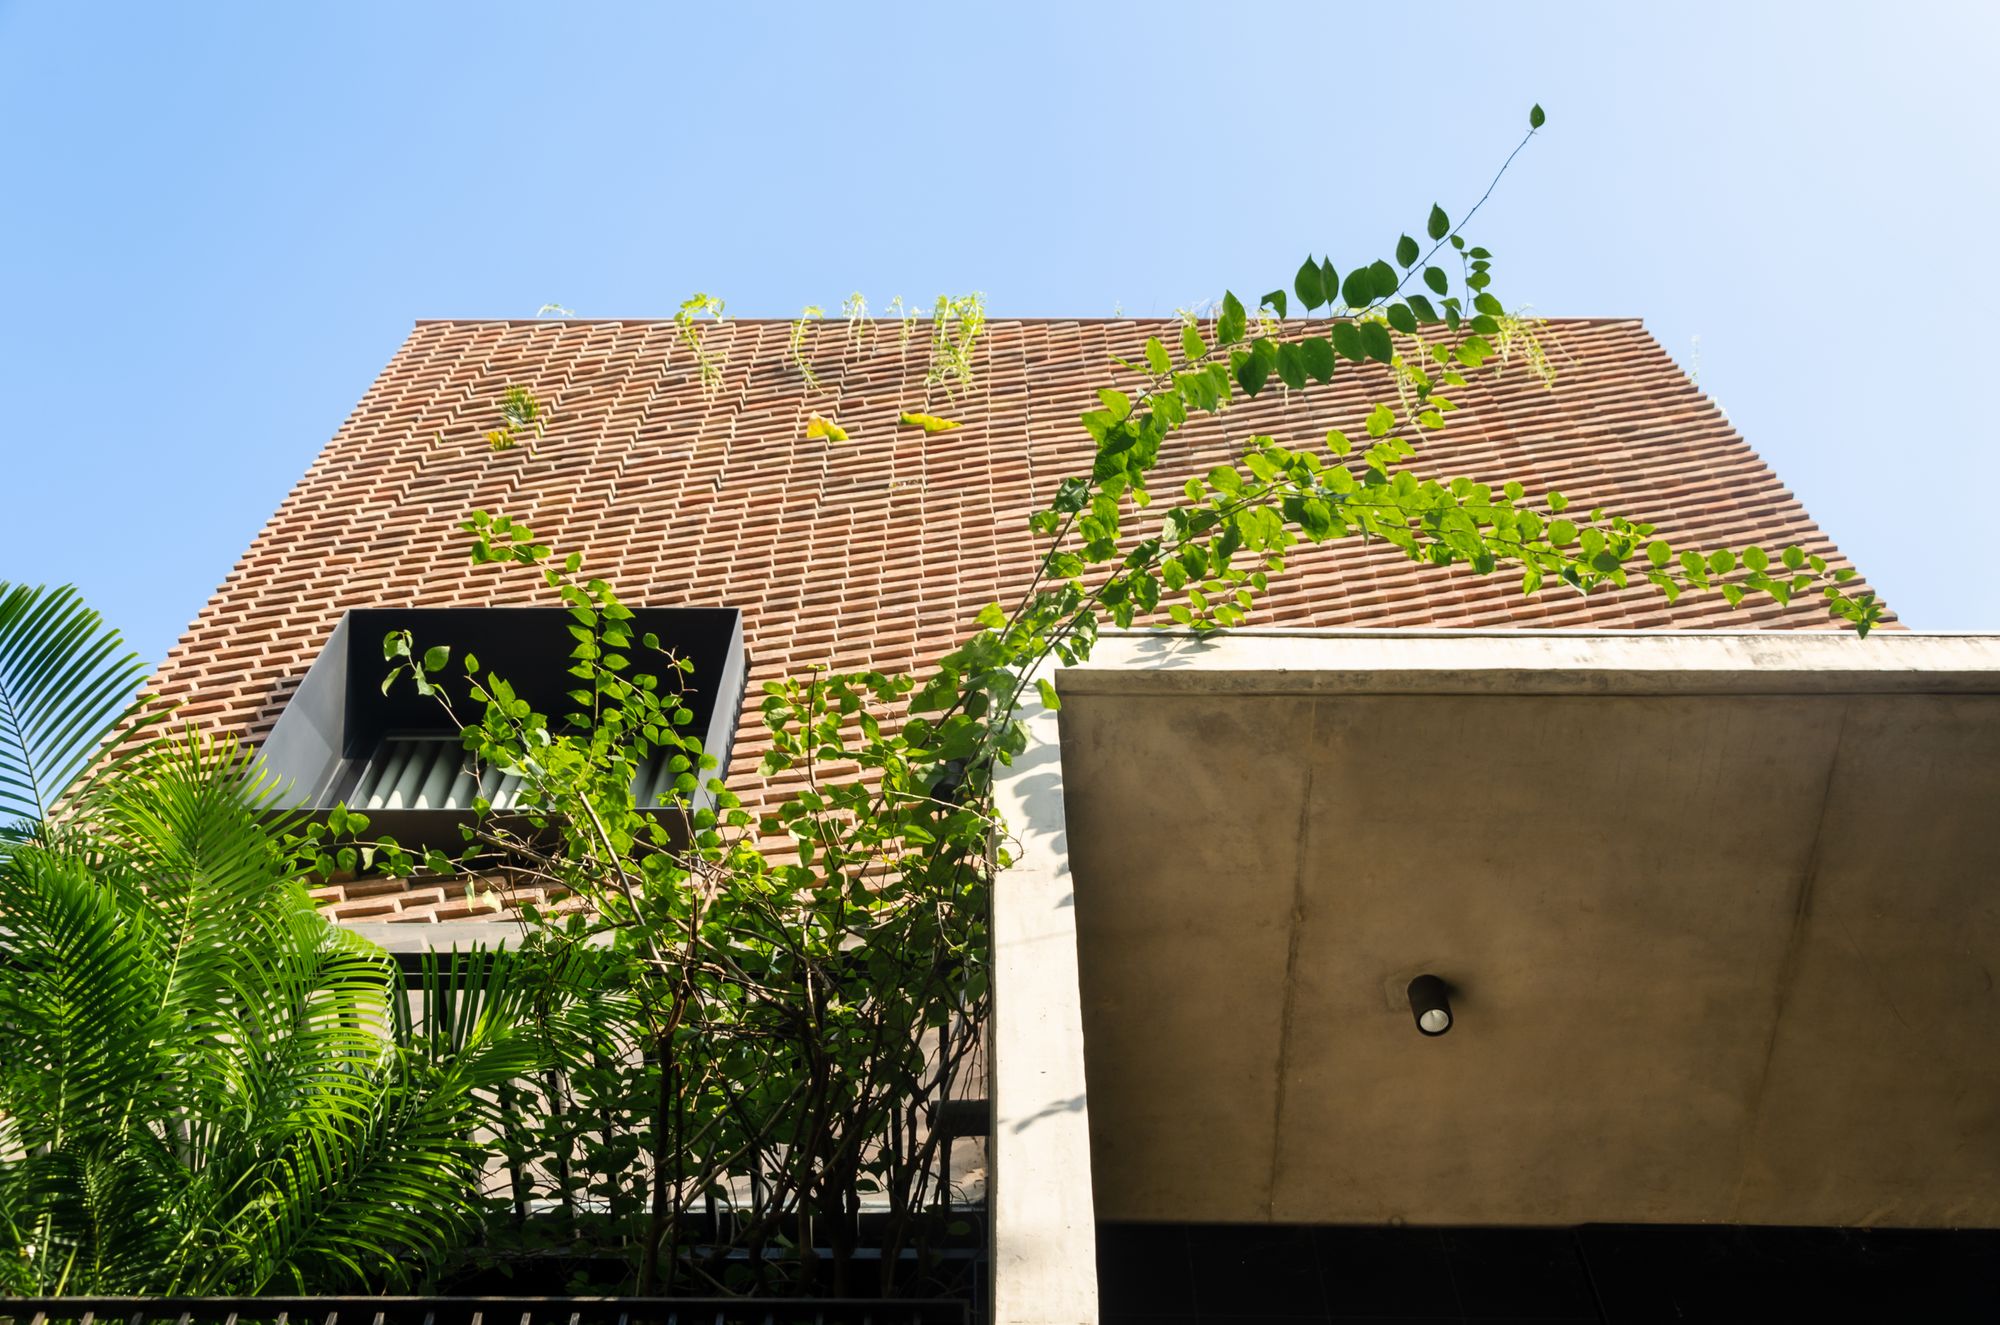 This compact house with a patterned brick façade softens the effect of a robust material palette by amalgamating with nature